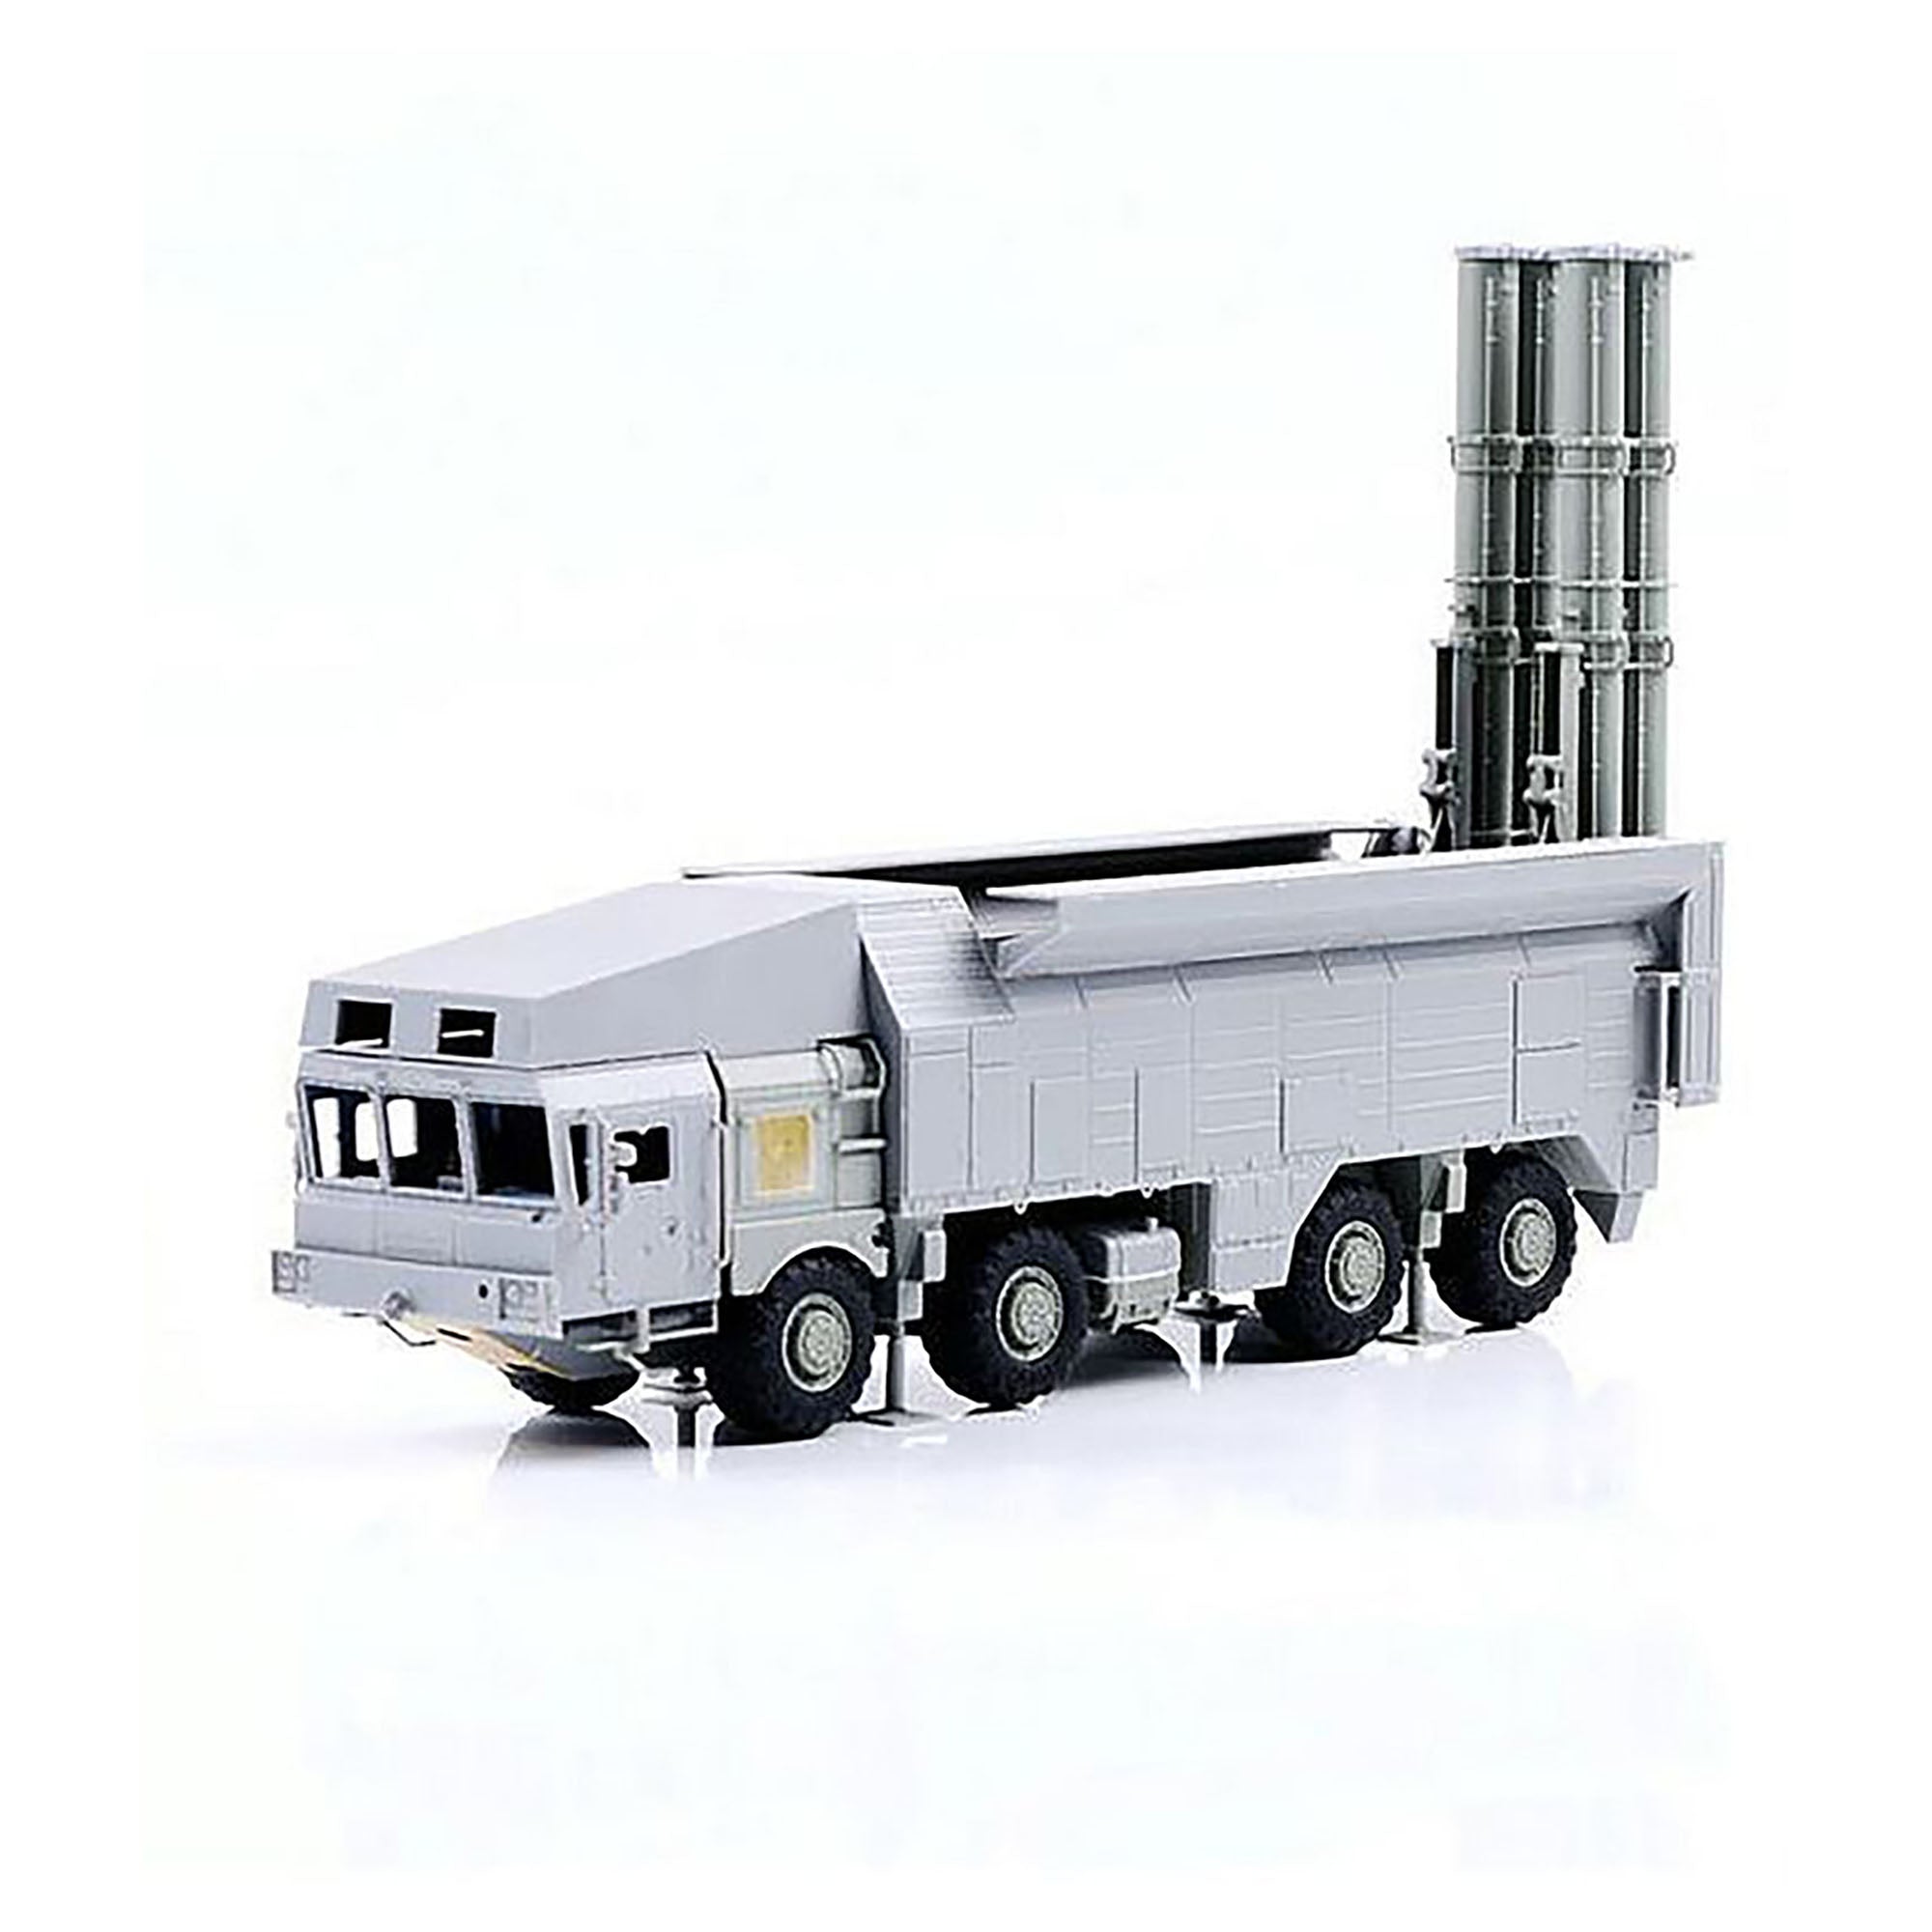 Modelcollect UA72091 1/72 Russian 3M-54 KLUB-M Missile Launcher MZKT Chassis Model Kit